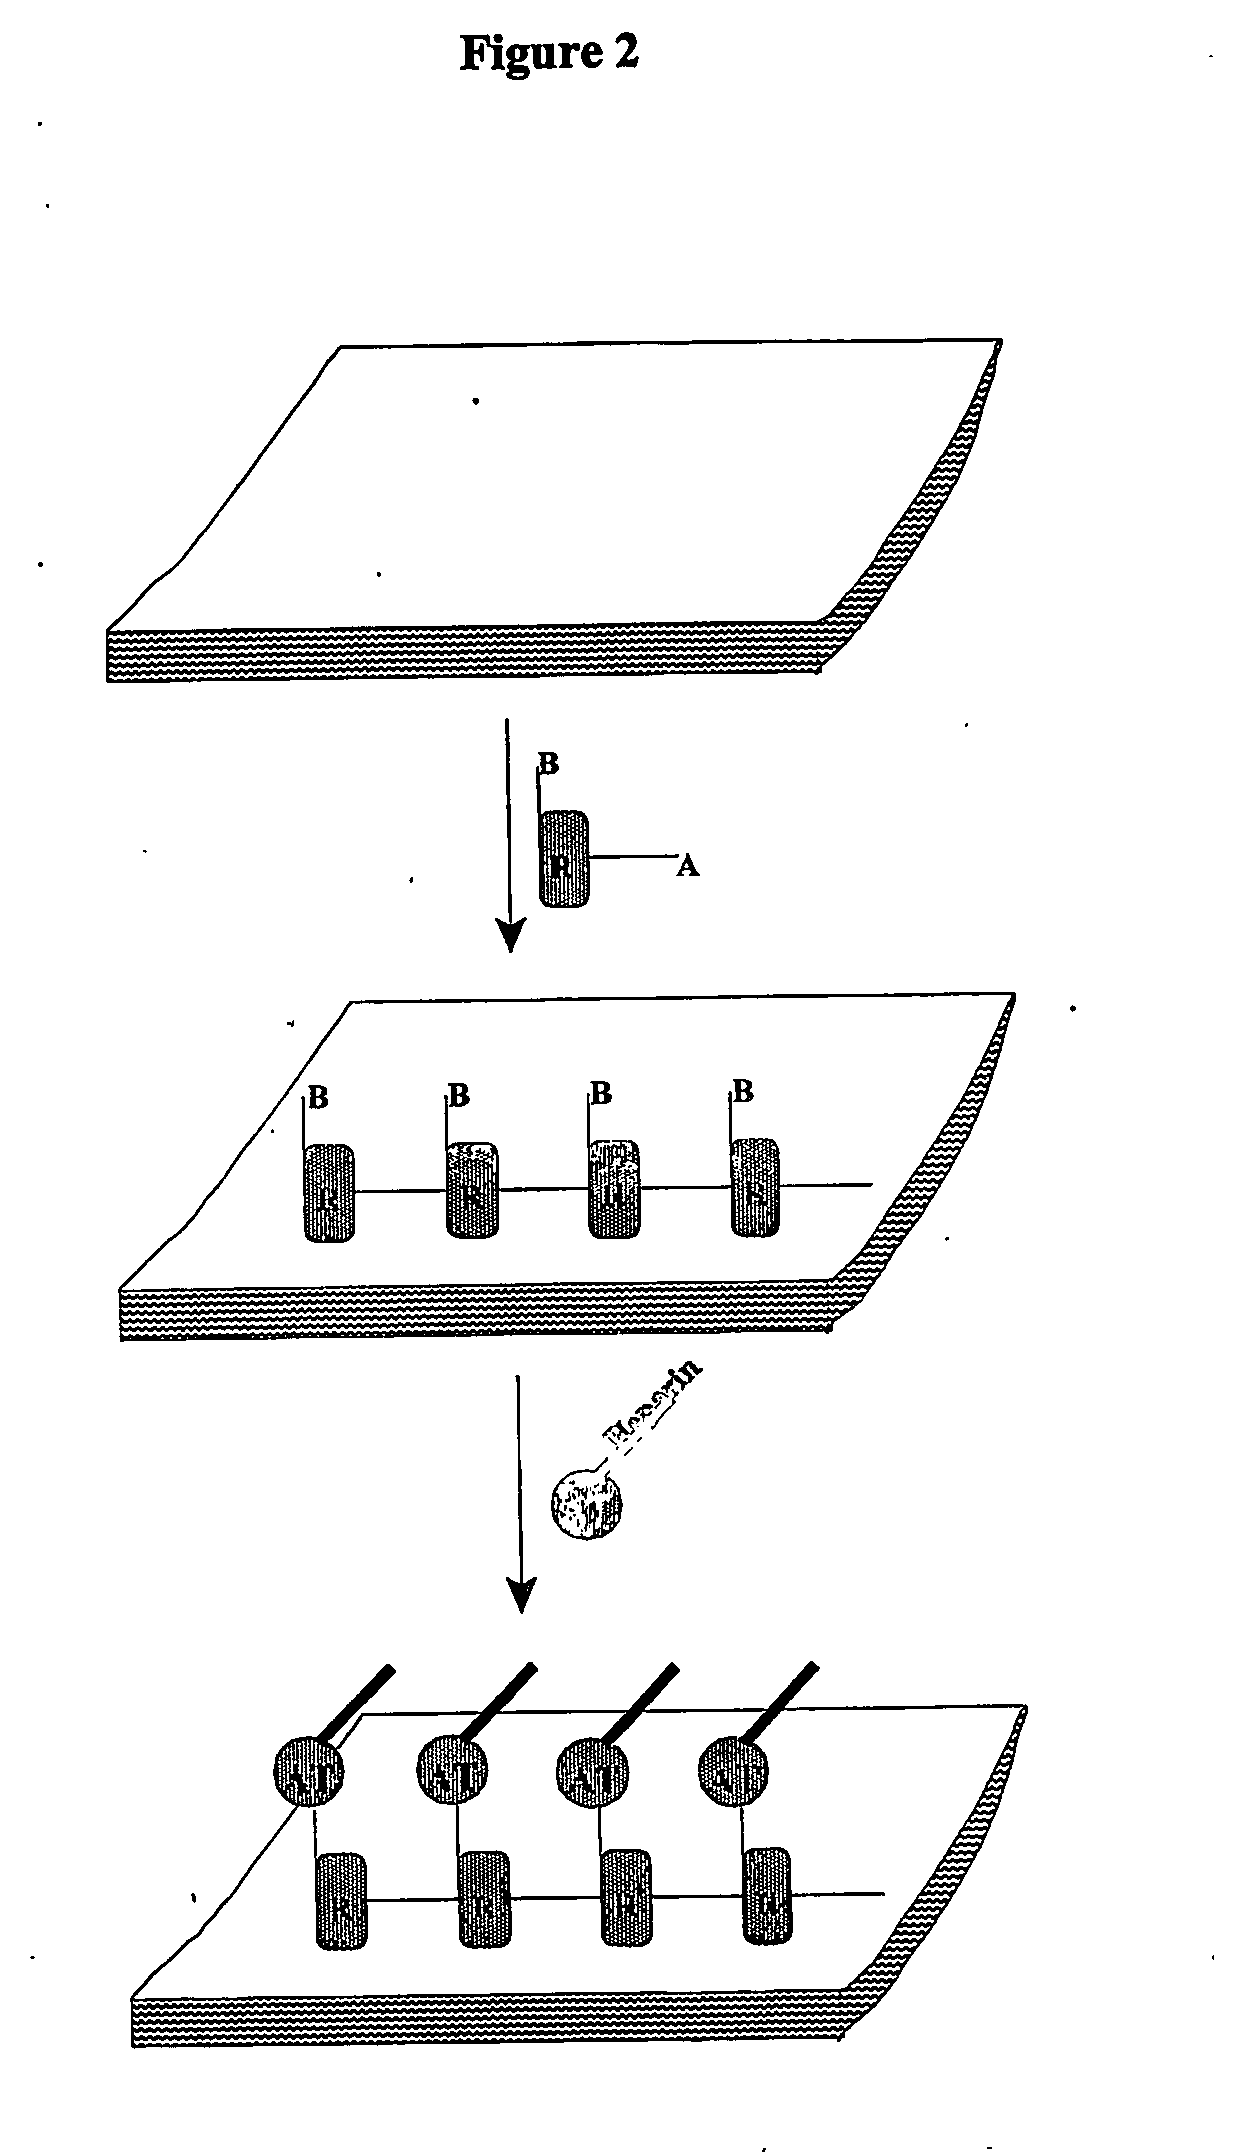 Coating composition for polymeric surfaces comprising serpin or serpin derivatives